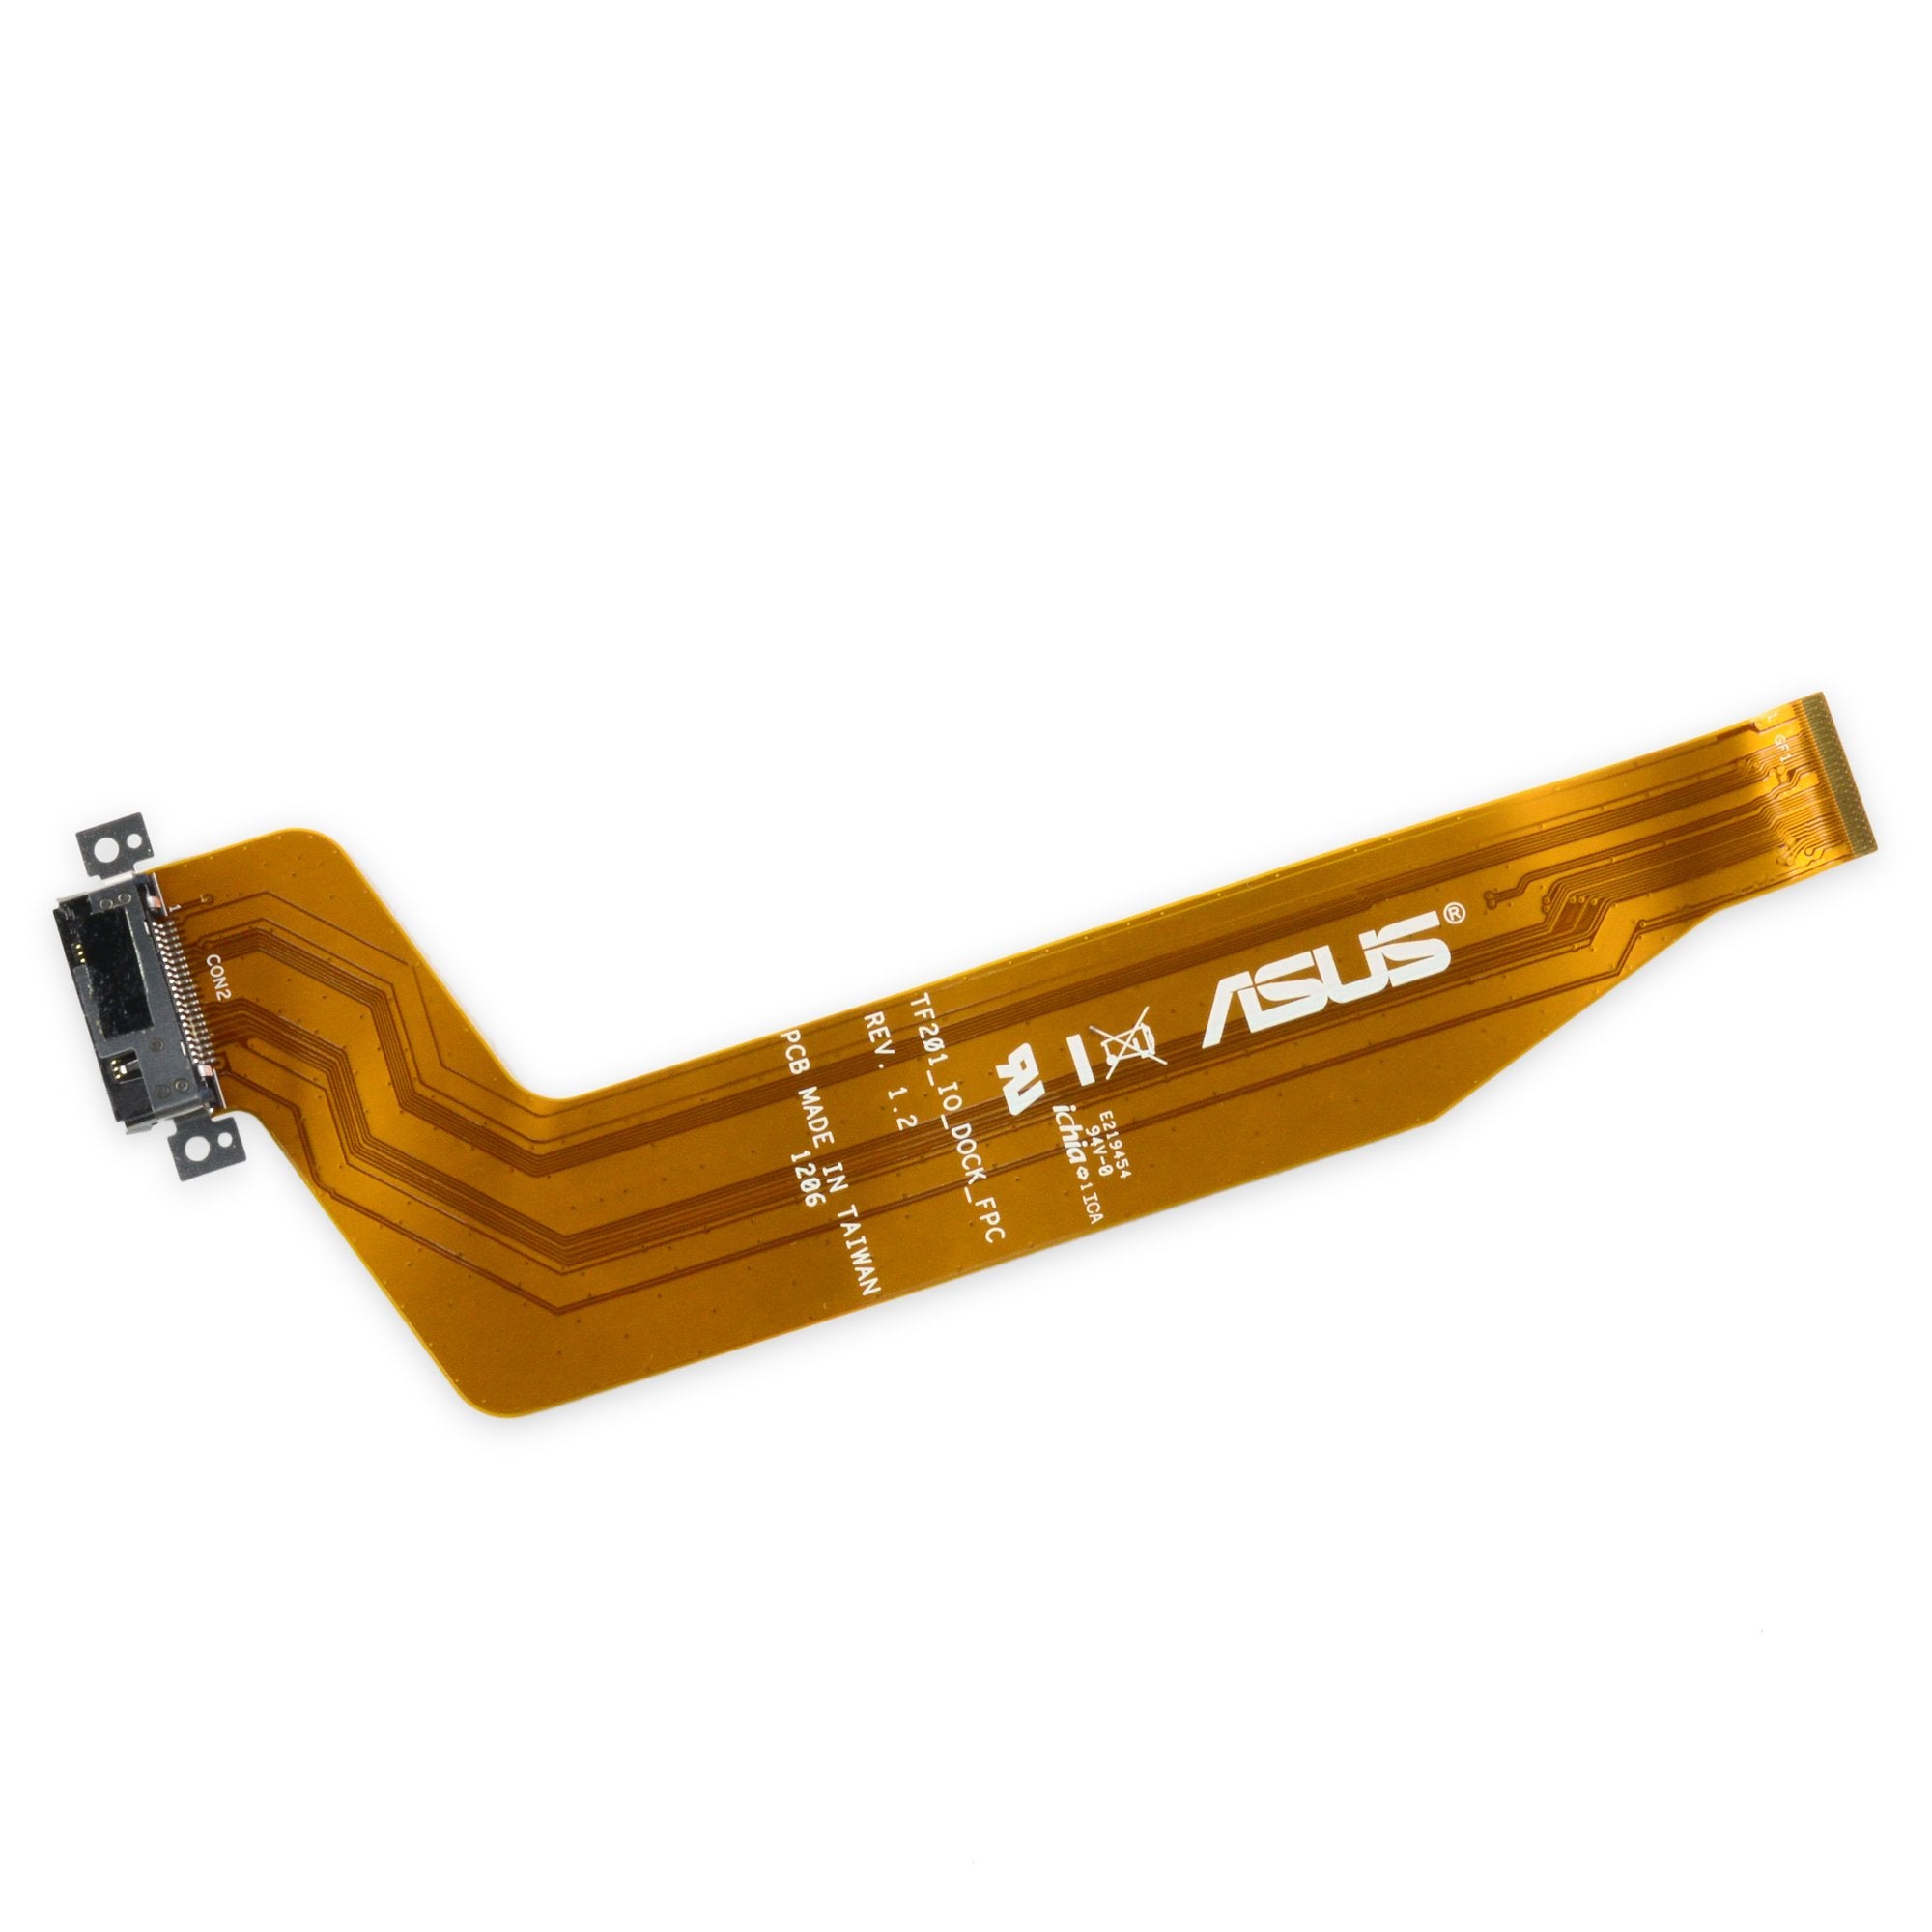 ASUS Eee Pad Transformer Prime Charging Assembly